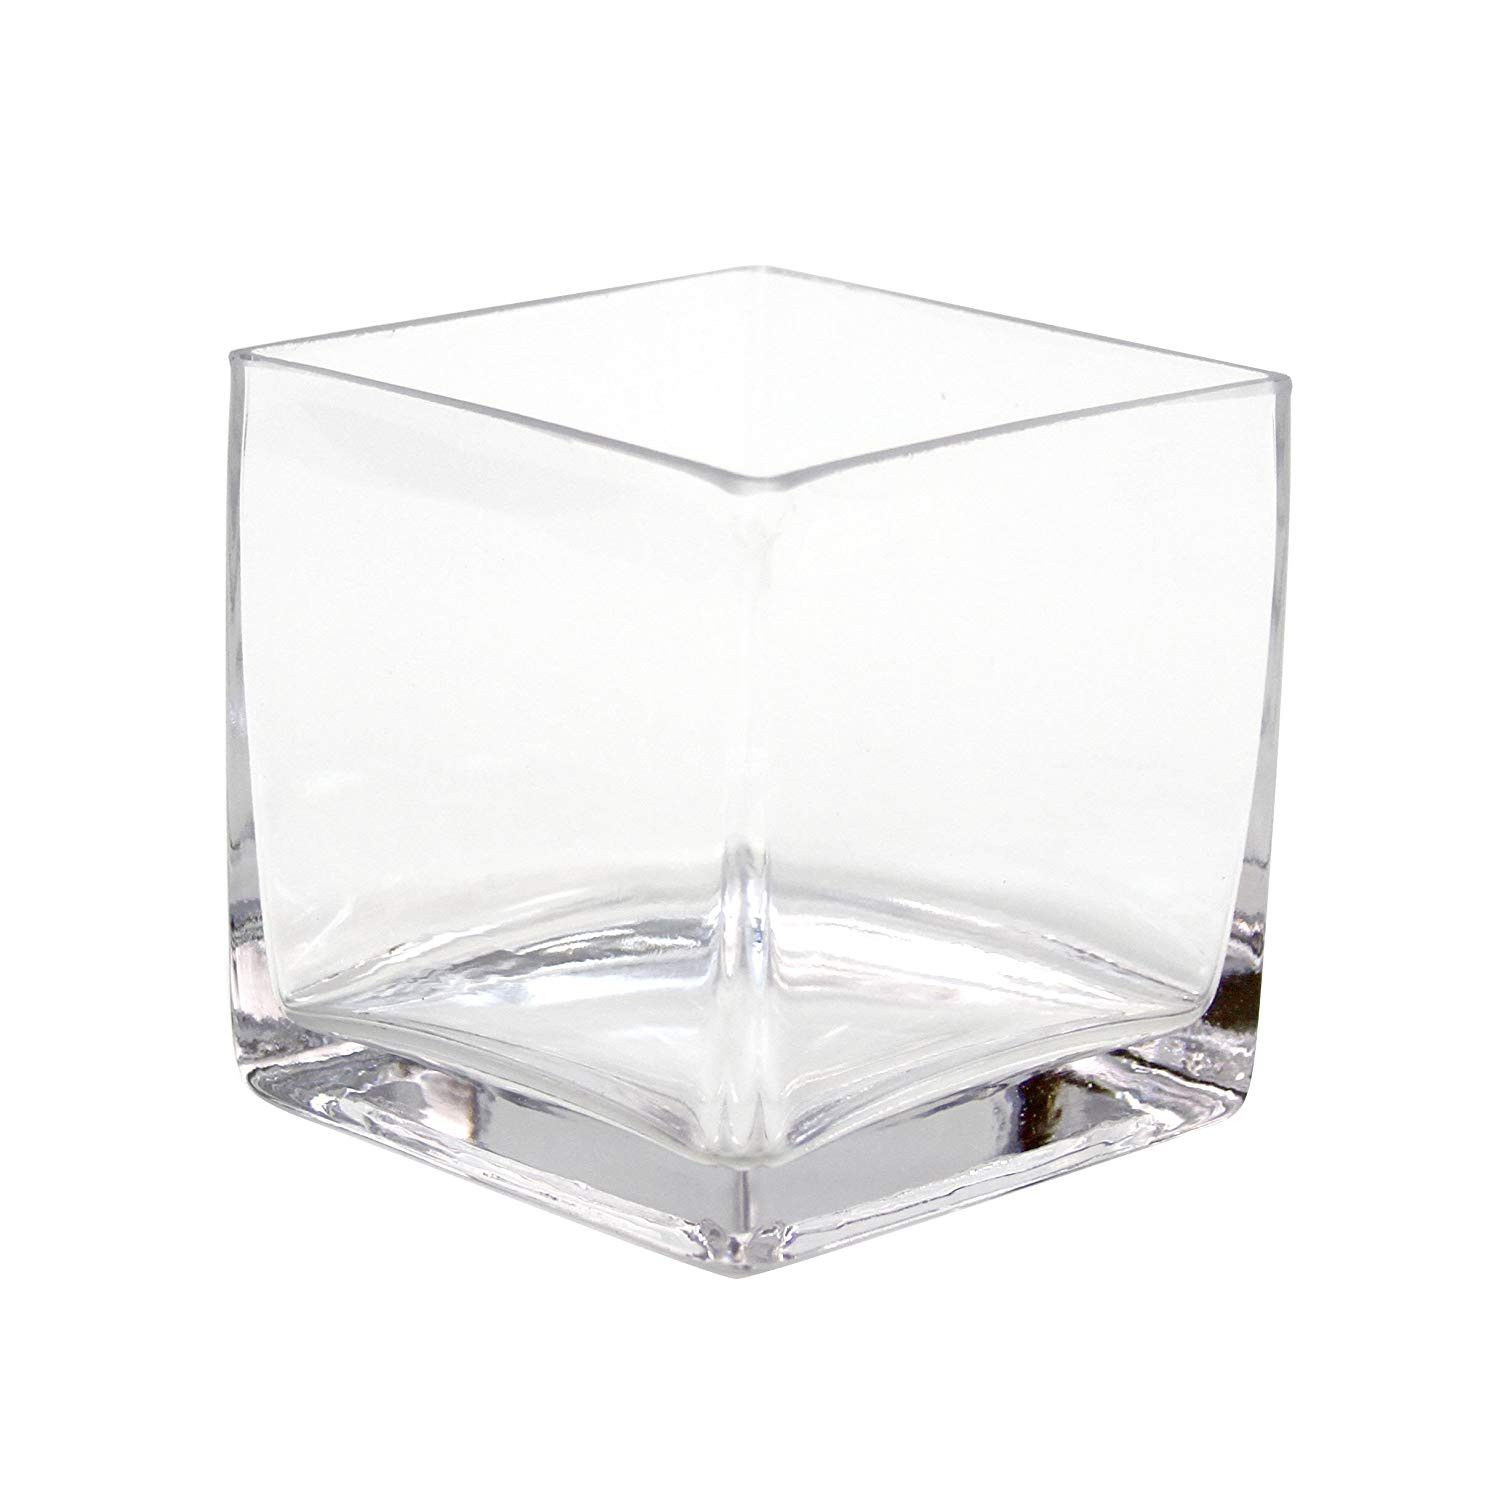 4x4x4 square glass vases of amazon com koyal wholesale 404343 12 pack cube square glass vases throughout amazon com koyal wholesale 404343 12 pack cube square glass vases 4 by 4 by 4 inch kitchen dining